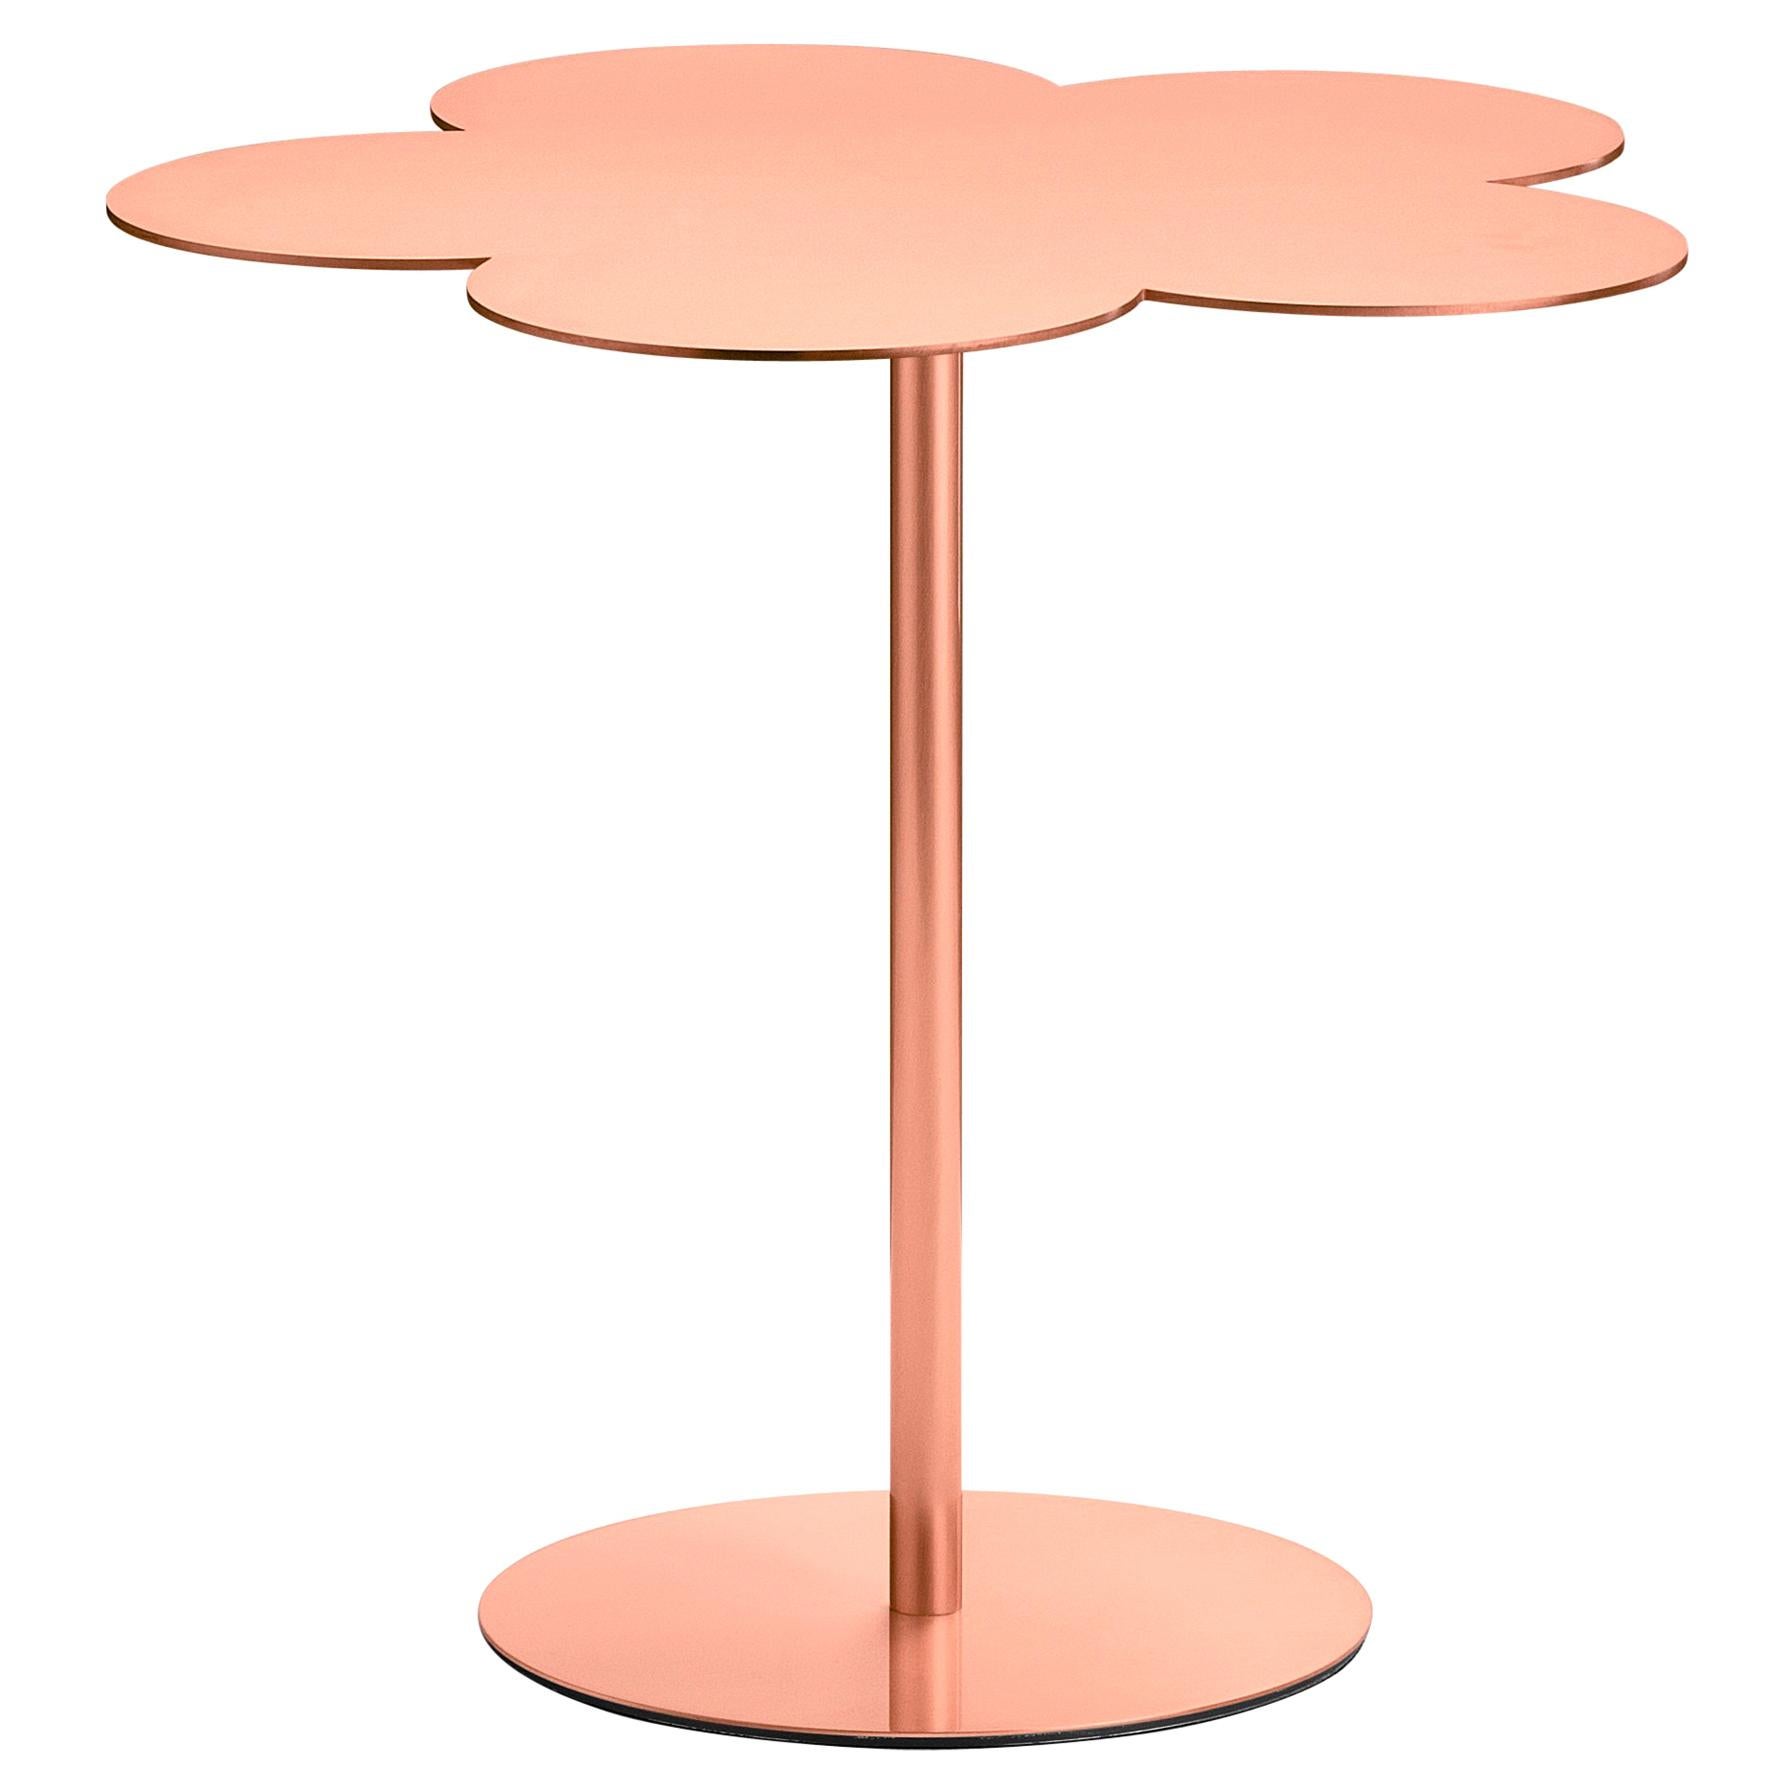 Ghidini 1961 Large Flowers Coffee Side Table in Copper by Stefano Giovannoni